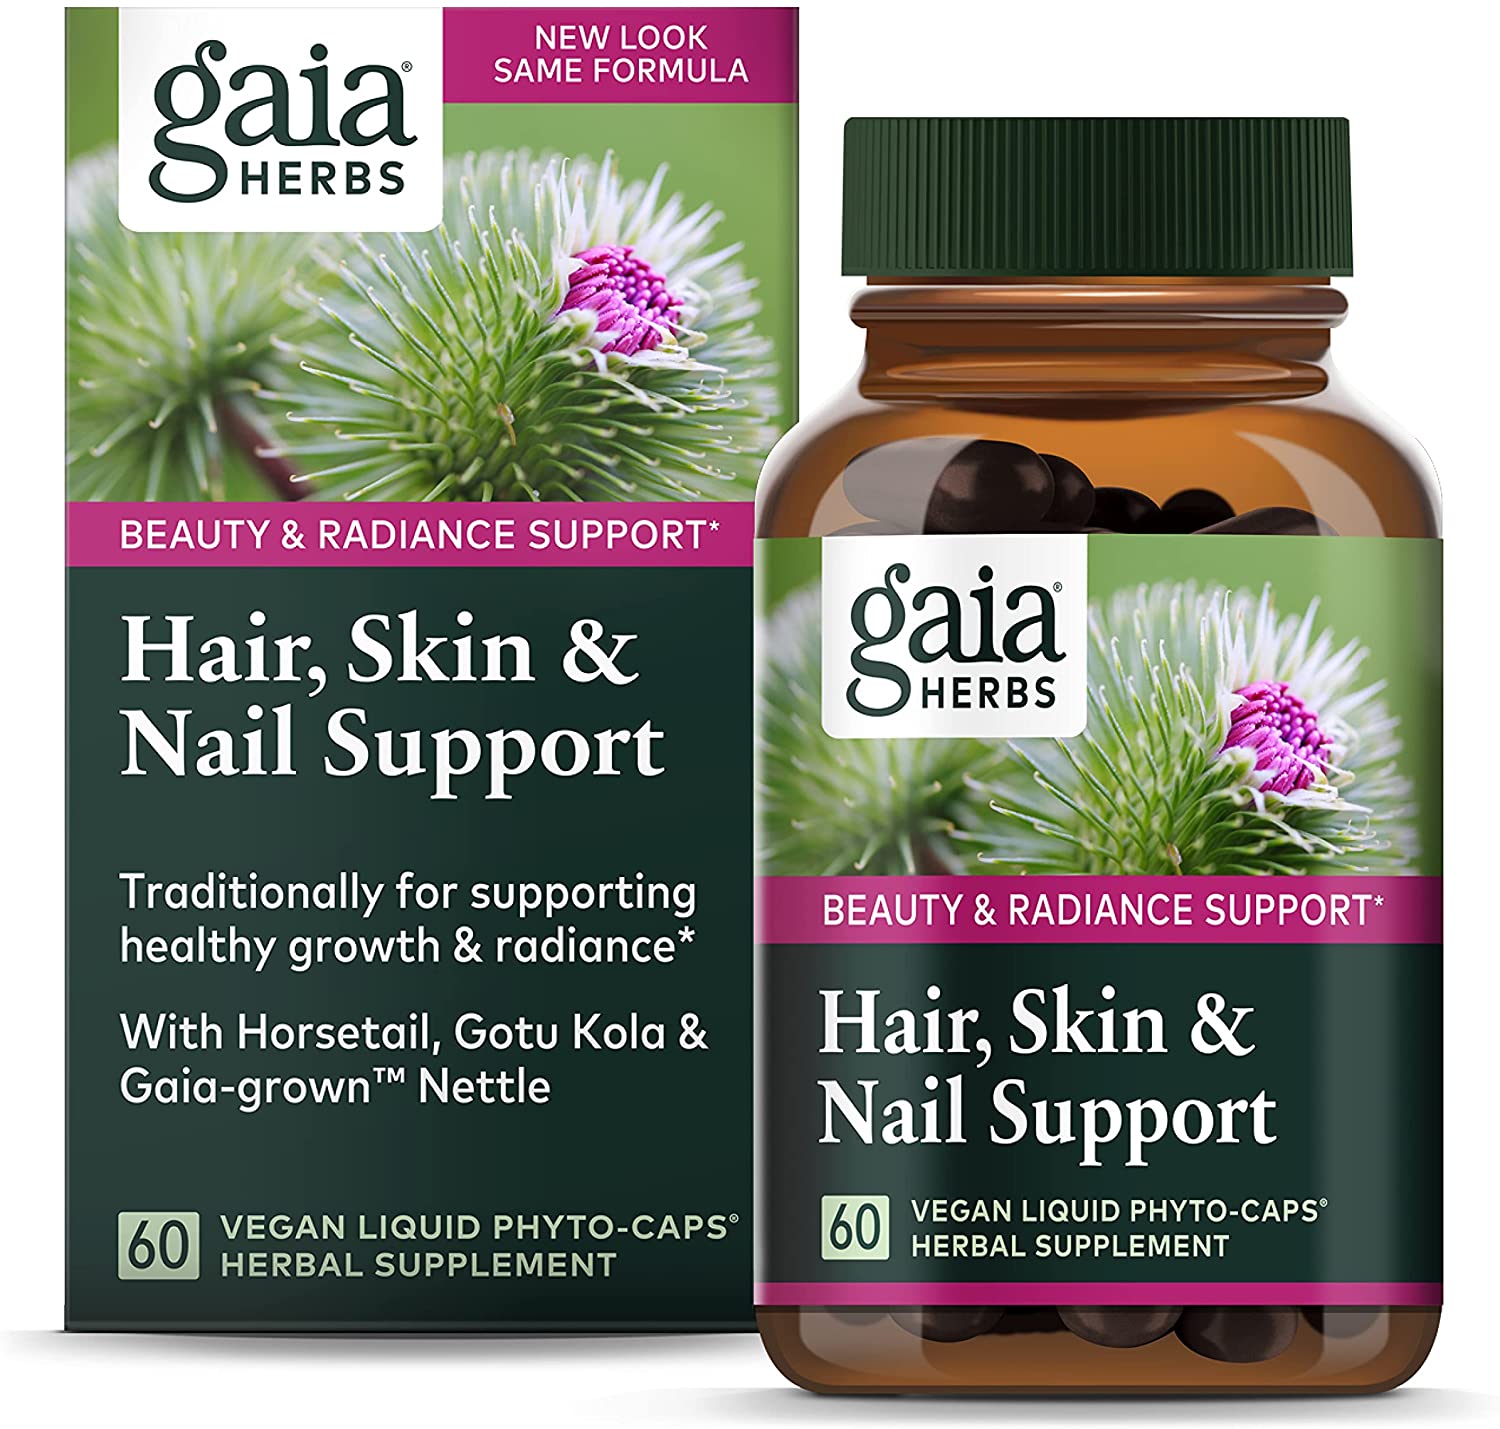 Gaia Herbs Hair, Skin & Nail Support, Vegan Liquid Capsules, 60 Count - Growth Nutrients & Antioxidants to Support a Natural Glow